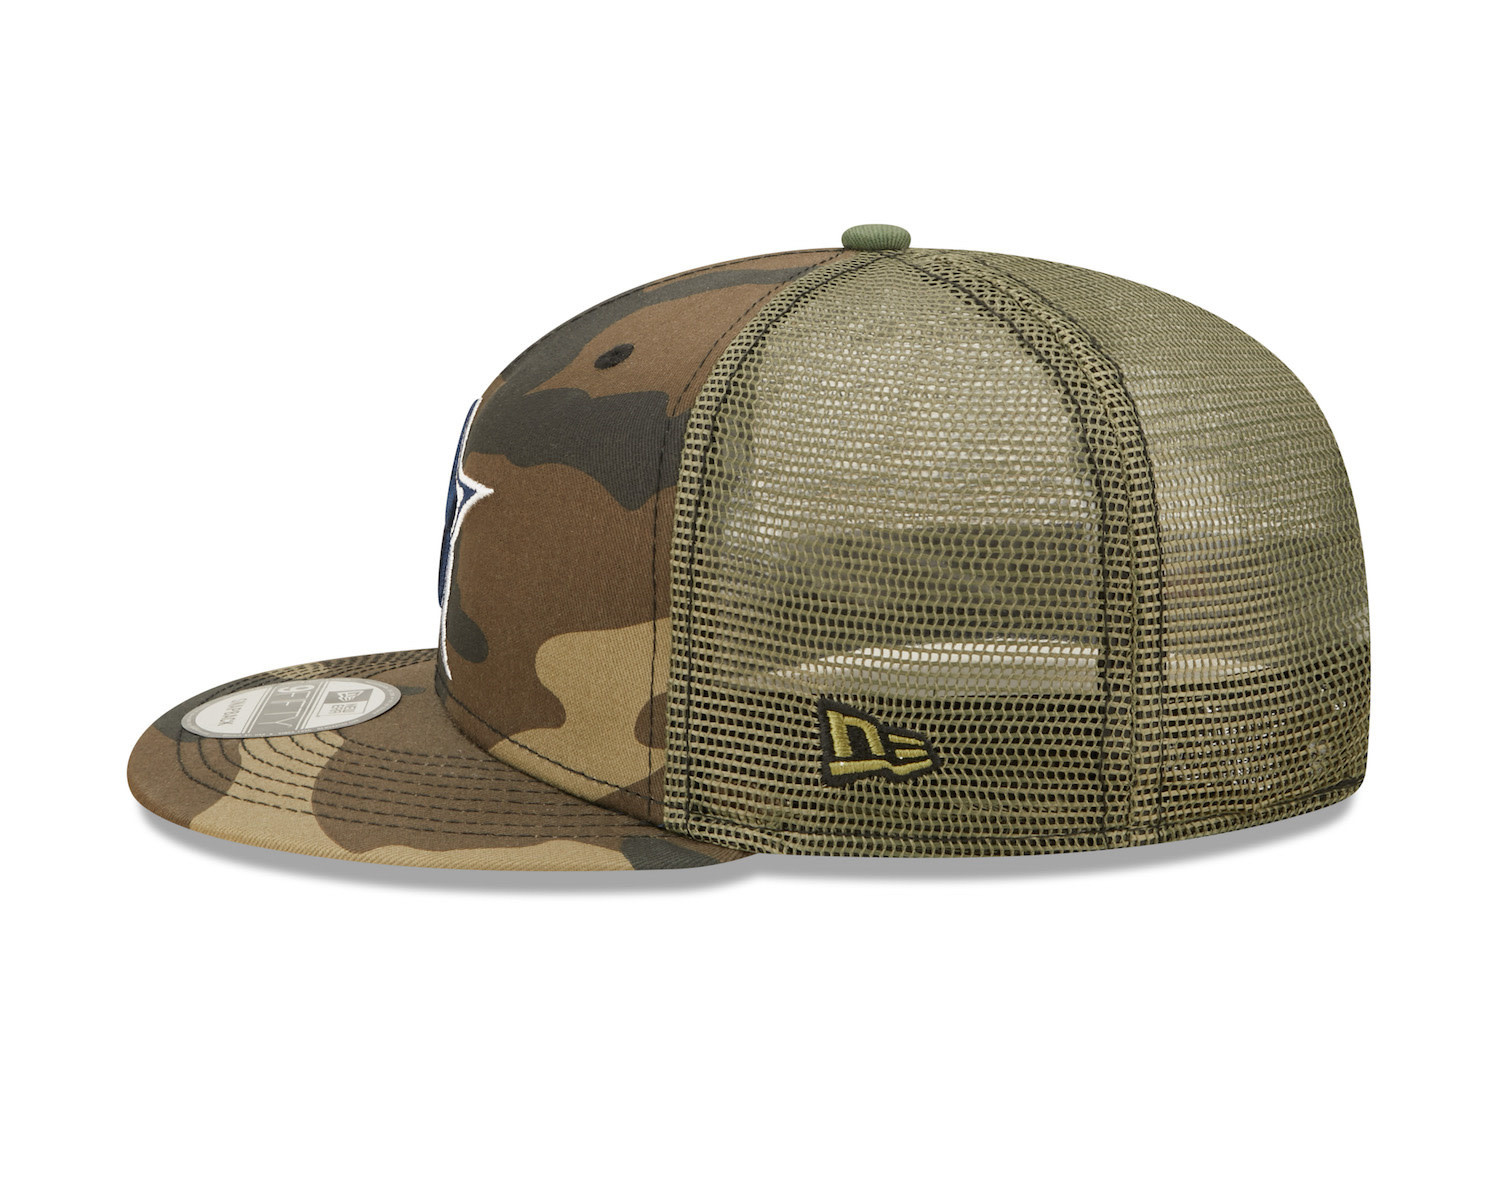 Army Camo Trucker Hat - Cowboy's Game Washer